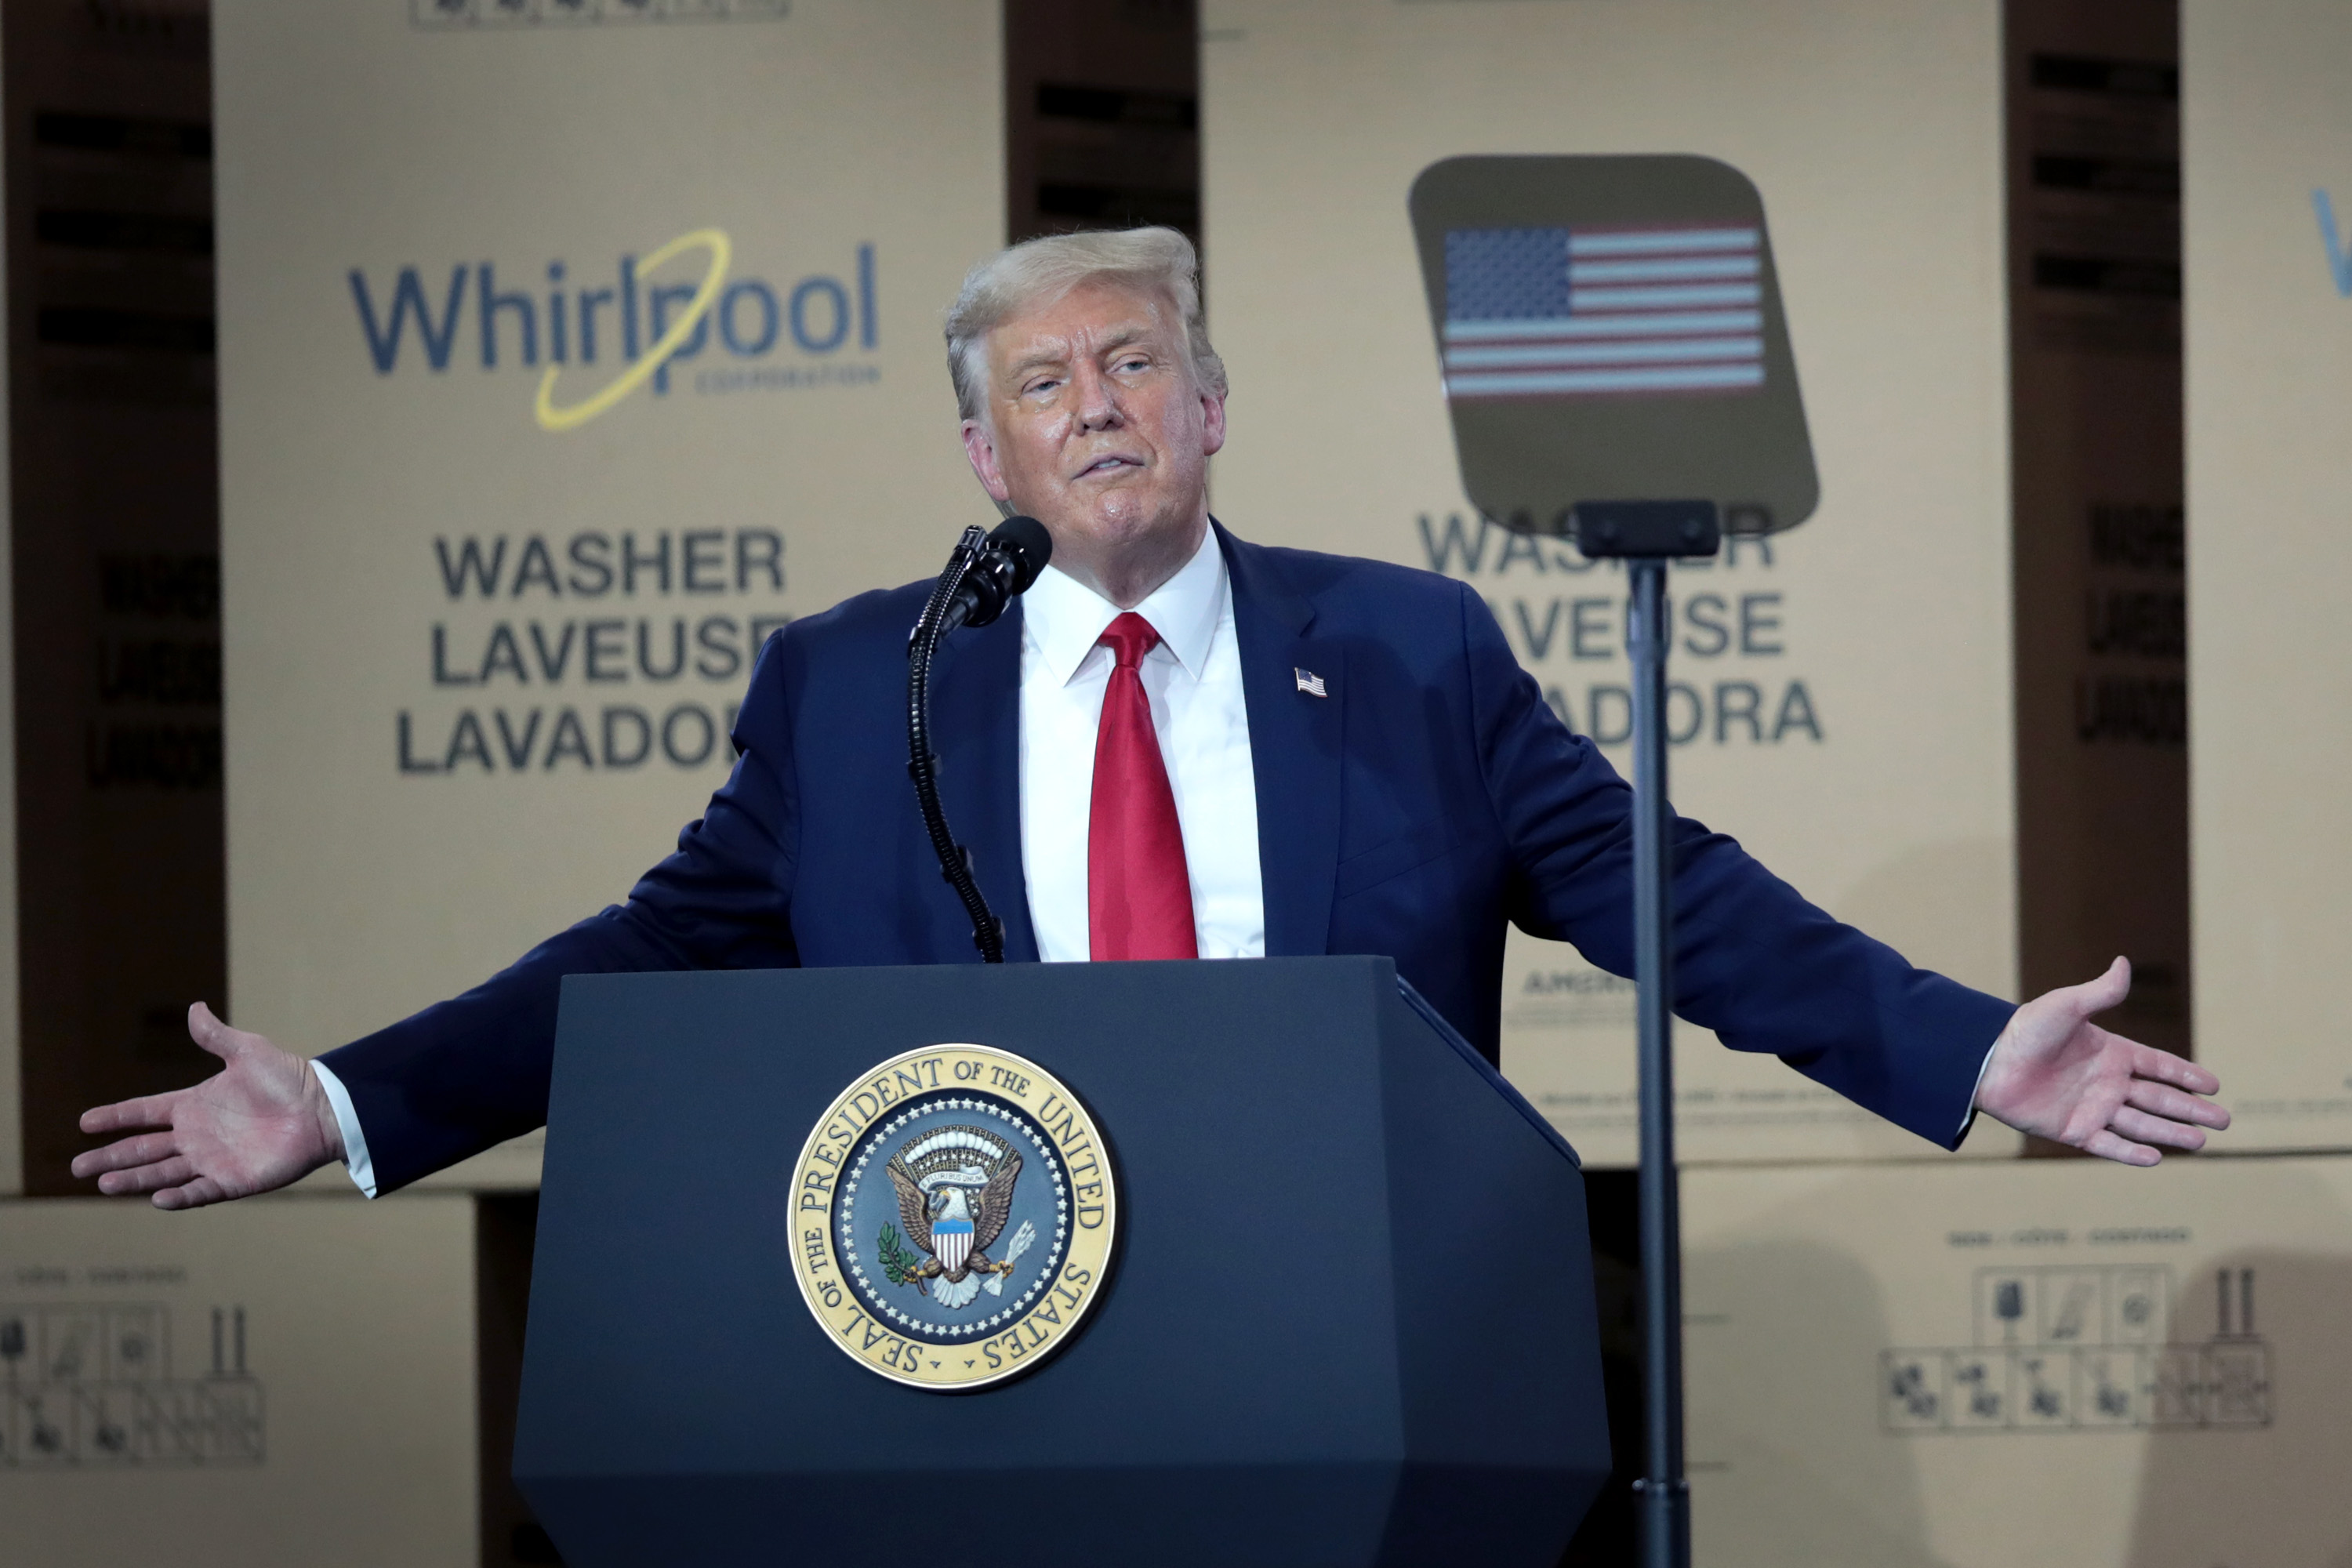 CLYDE, OHIO - AUGUST 06: U.S. President Donald Trump speaks to workers at a Whirlpool manufacturing facility on August 06, 2020 in Clyde, Ohio. Whirlpool is the last remaining major appliance company headquartered in the United States. With more than 3,000 employees, the Clyde facility is one of the world's largest home washing machine plants, producing more than 20,000 machines a day. (Photo by Scott Olson/Getty Images)